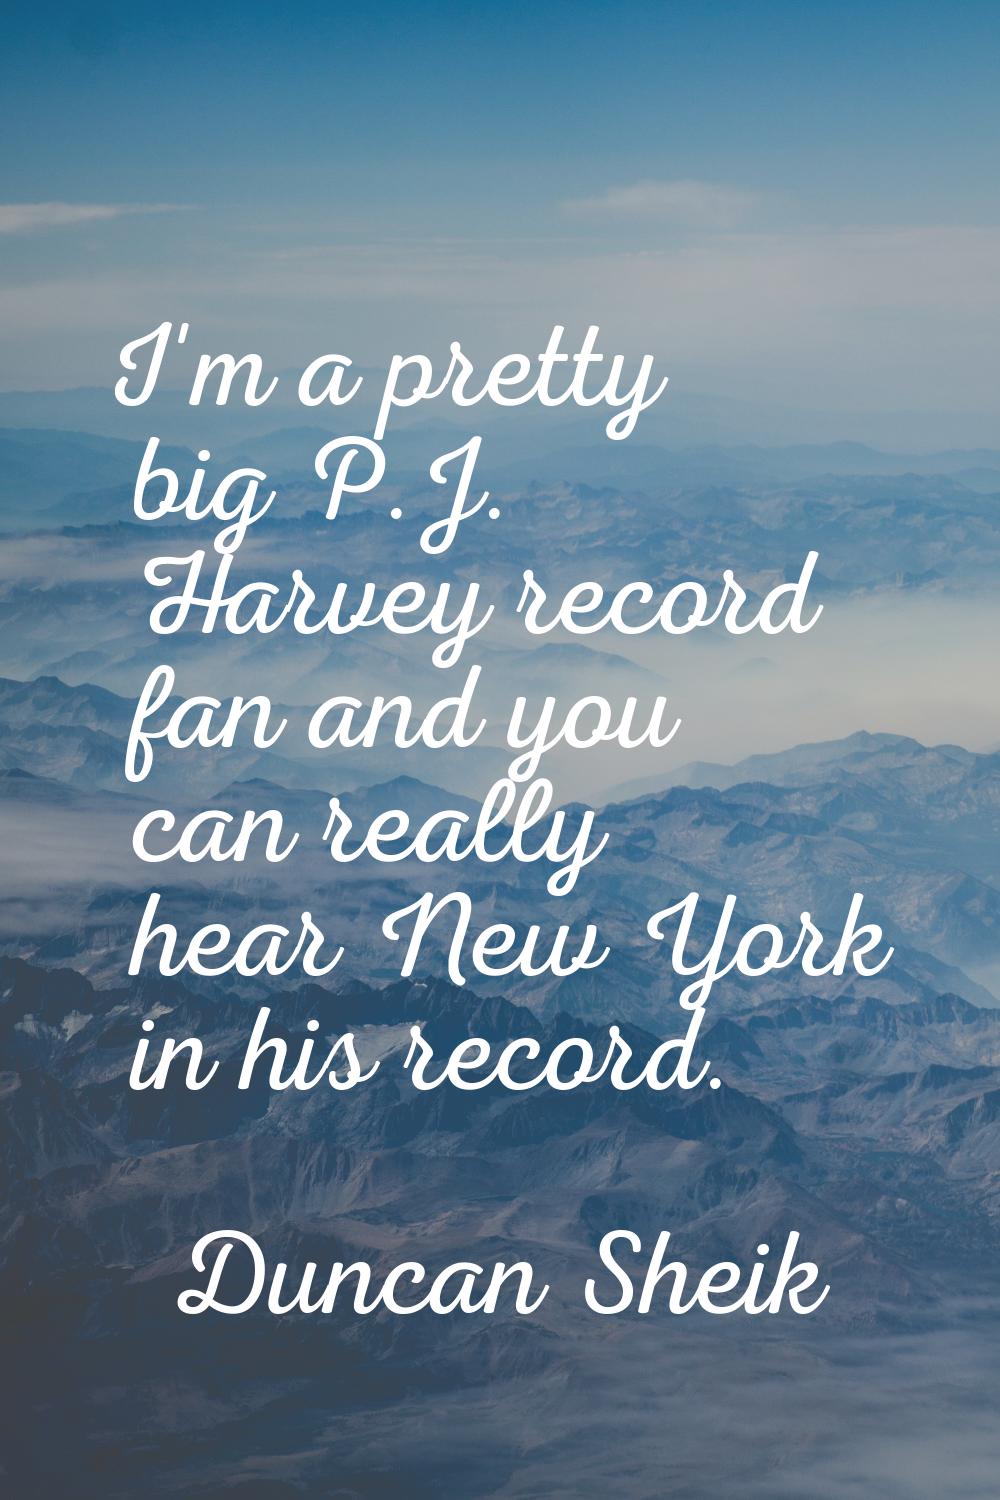 I'm a pretty big P.J. Harvey record fan and you can really hear New York in his record.